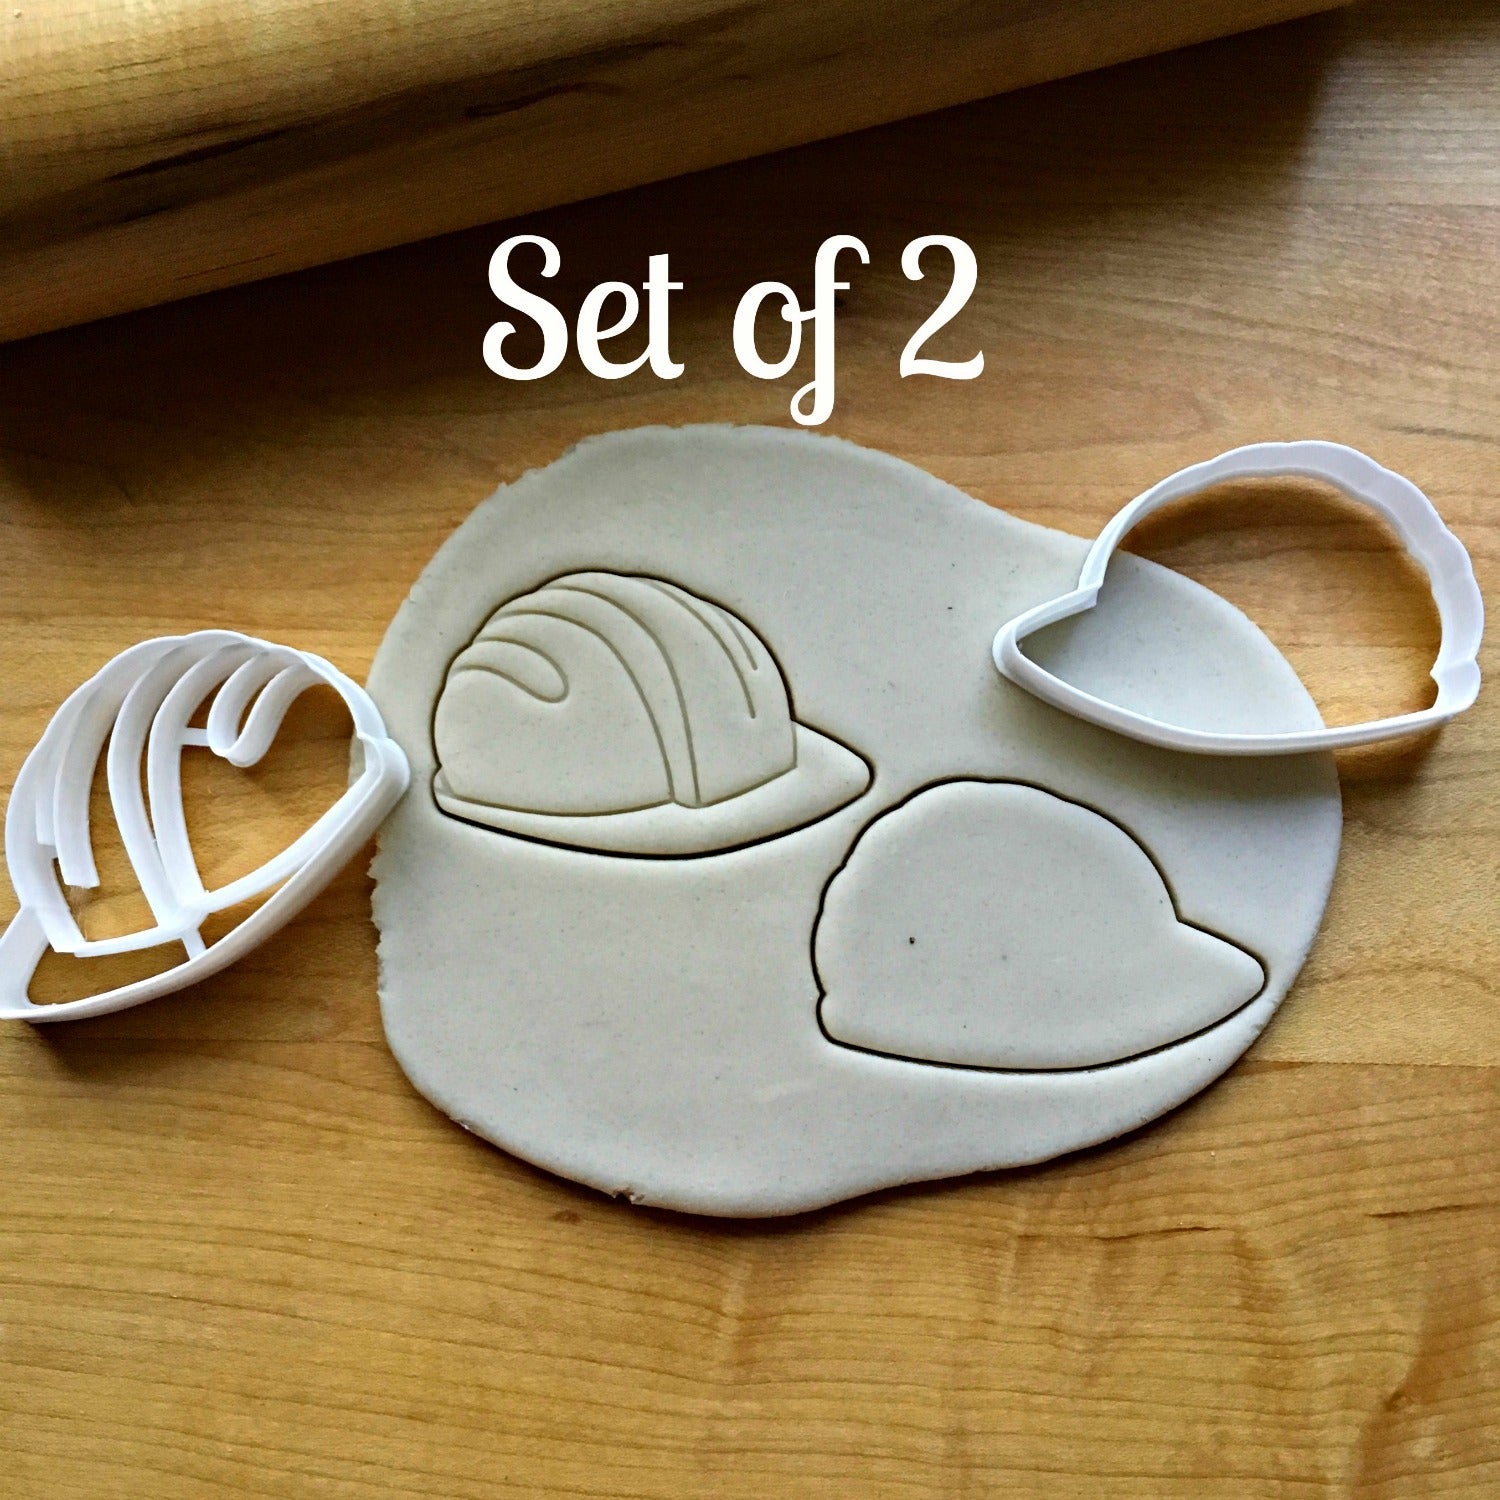 Set of 2 Construction Worker Hat Cookie Cutters/Dishwasher Safe